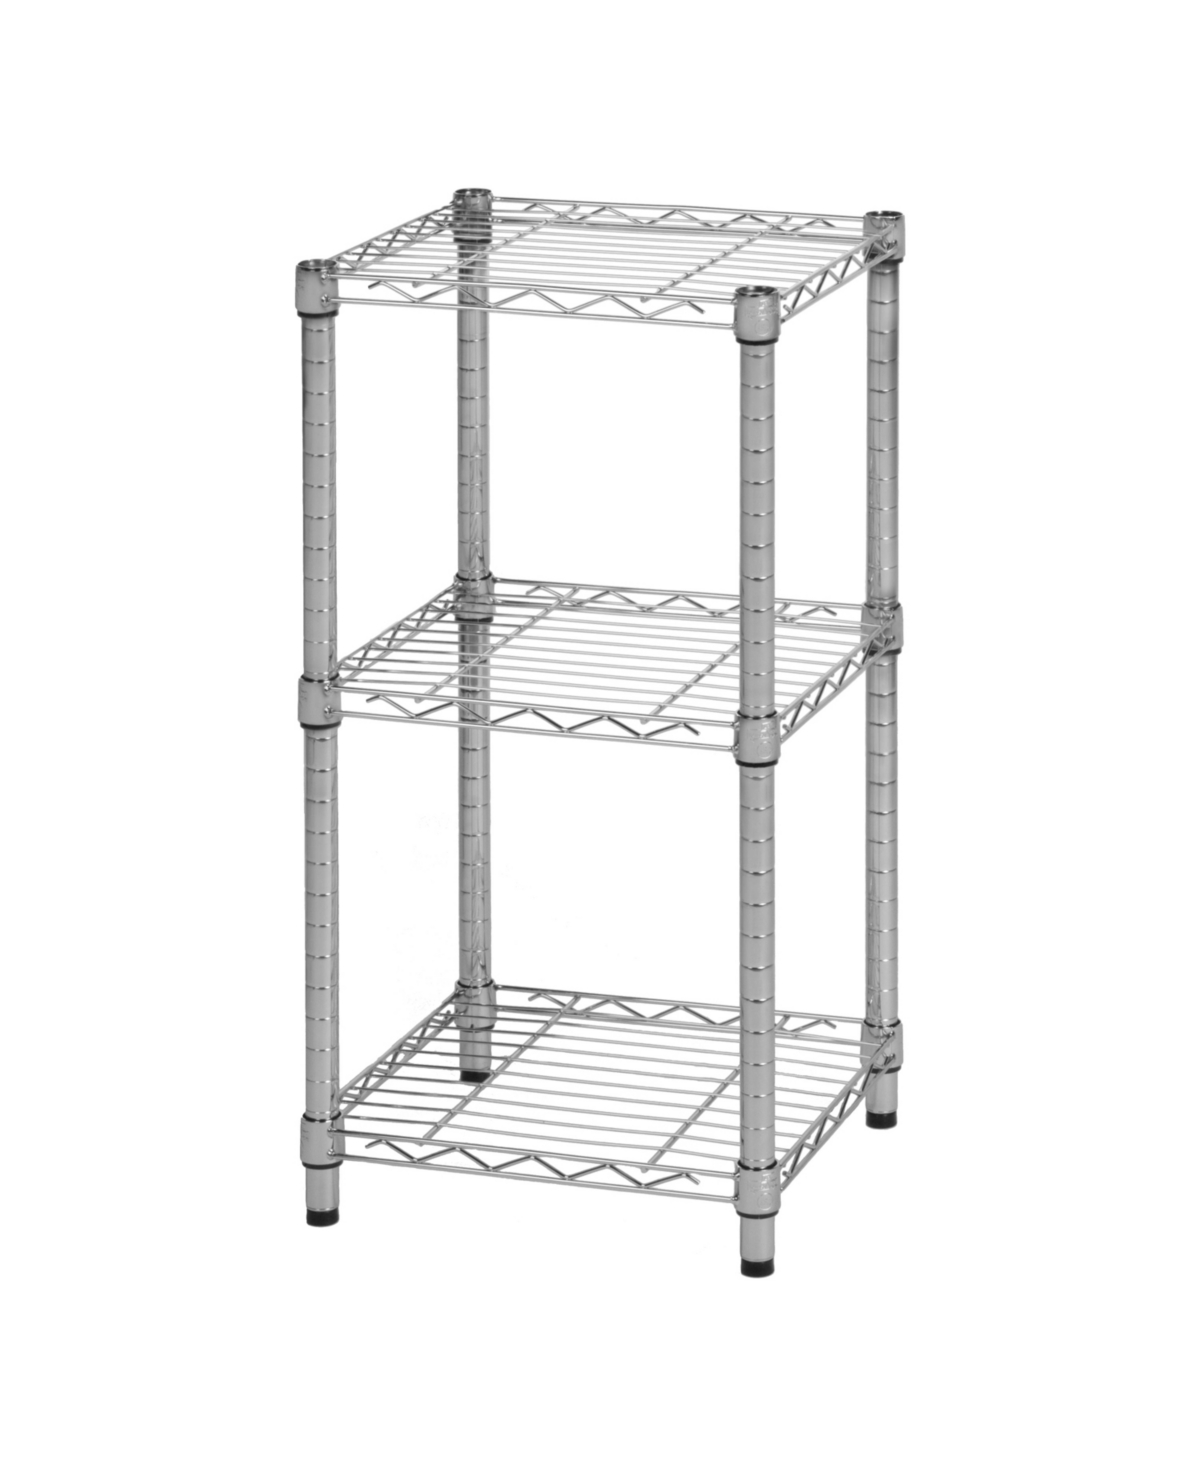 Honey Can Do 3-tier Adjustable Shelving Unit, 30" In Chrome